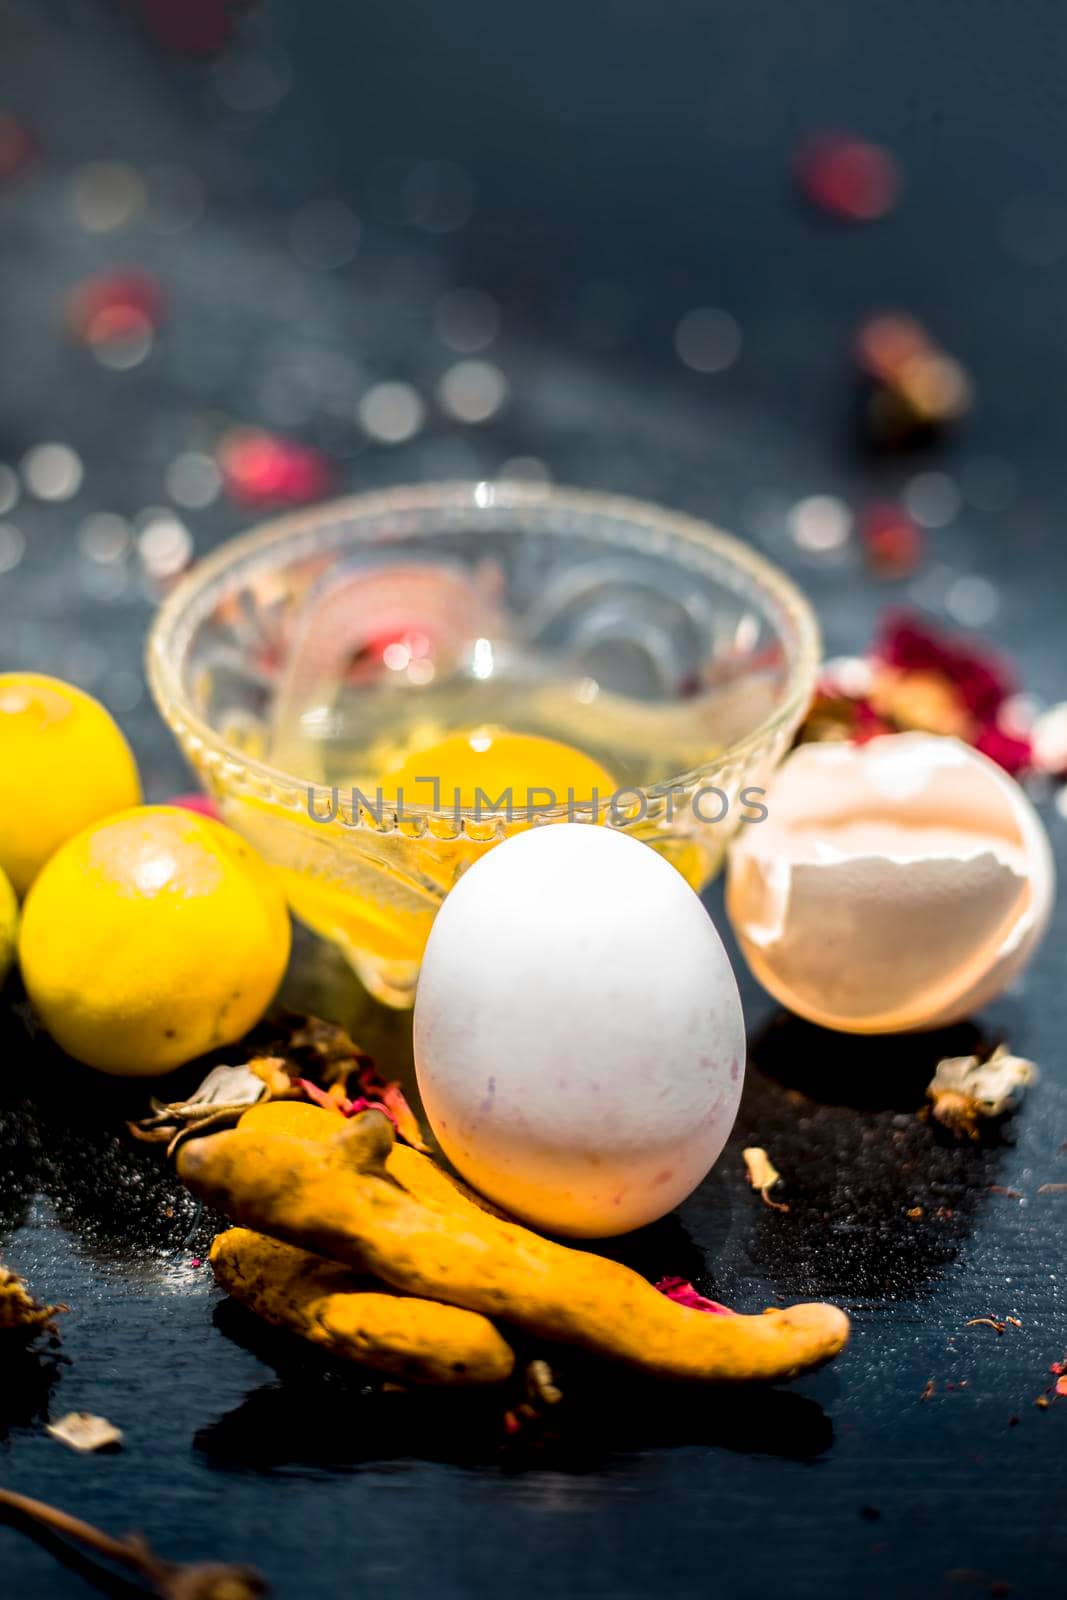 Face mask of lemon juice, honey, and curd along with some raw turmeric well mixed in a glass bowl along with entire raw ingredients on the wooden surface for acne-prone skin and blemishes. by mirzamlk